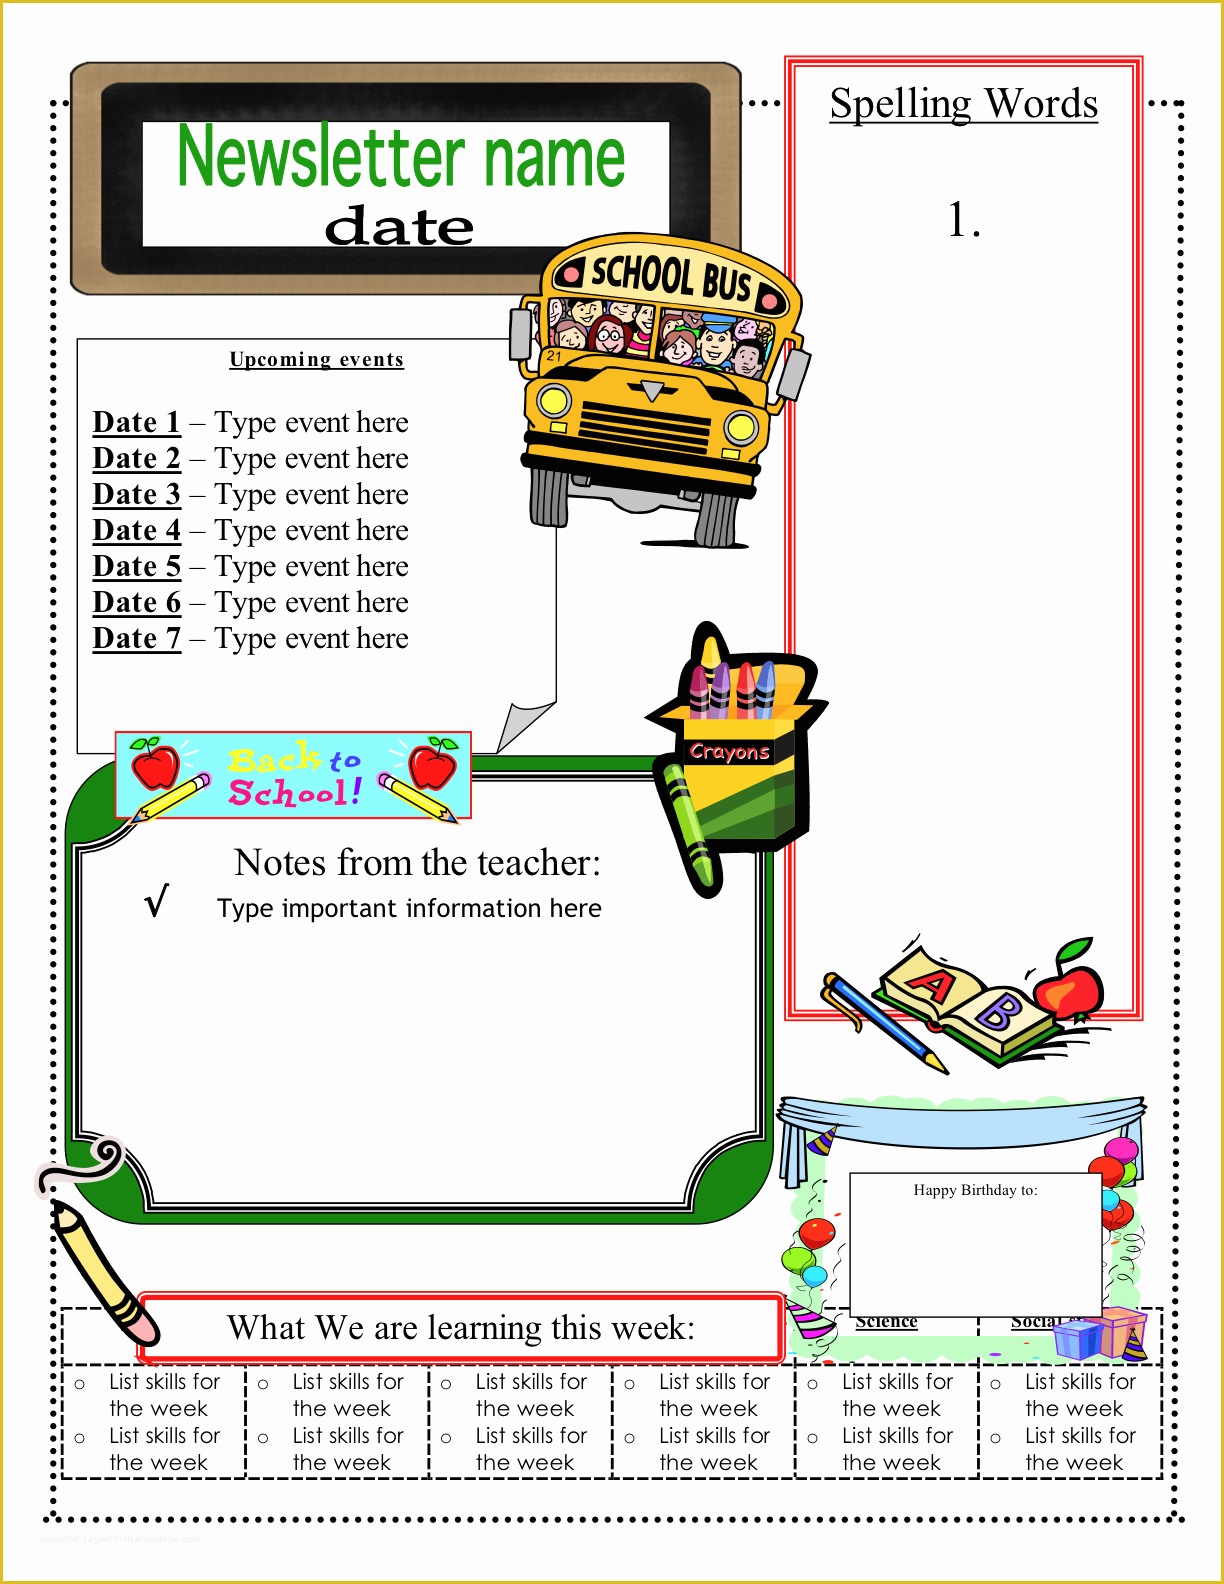 Free Classroom Newsletter Templates Of 3 6 Free Resources Free Classroom Newsletter Templates